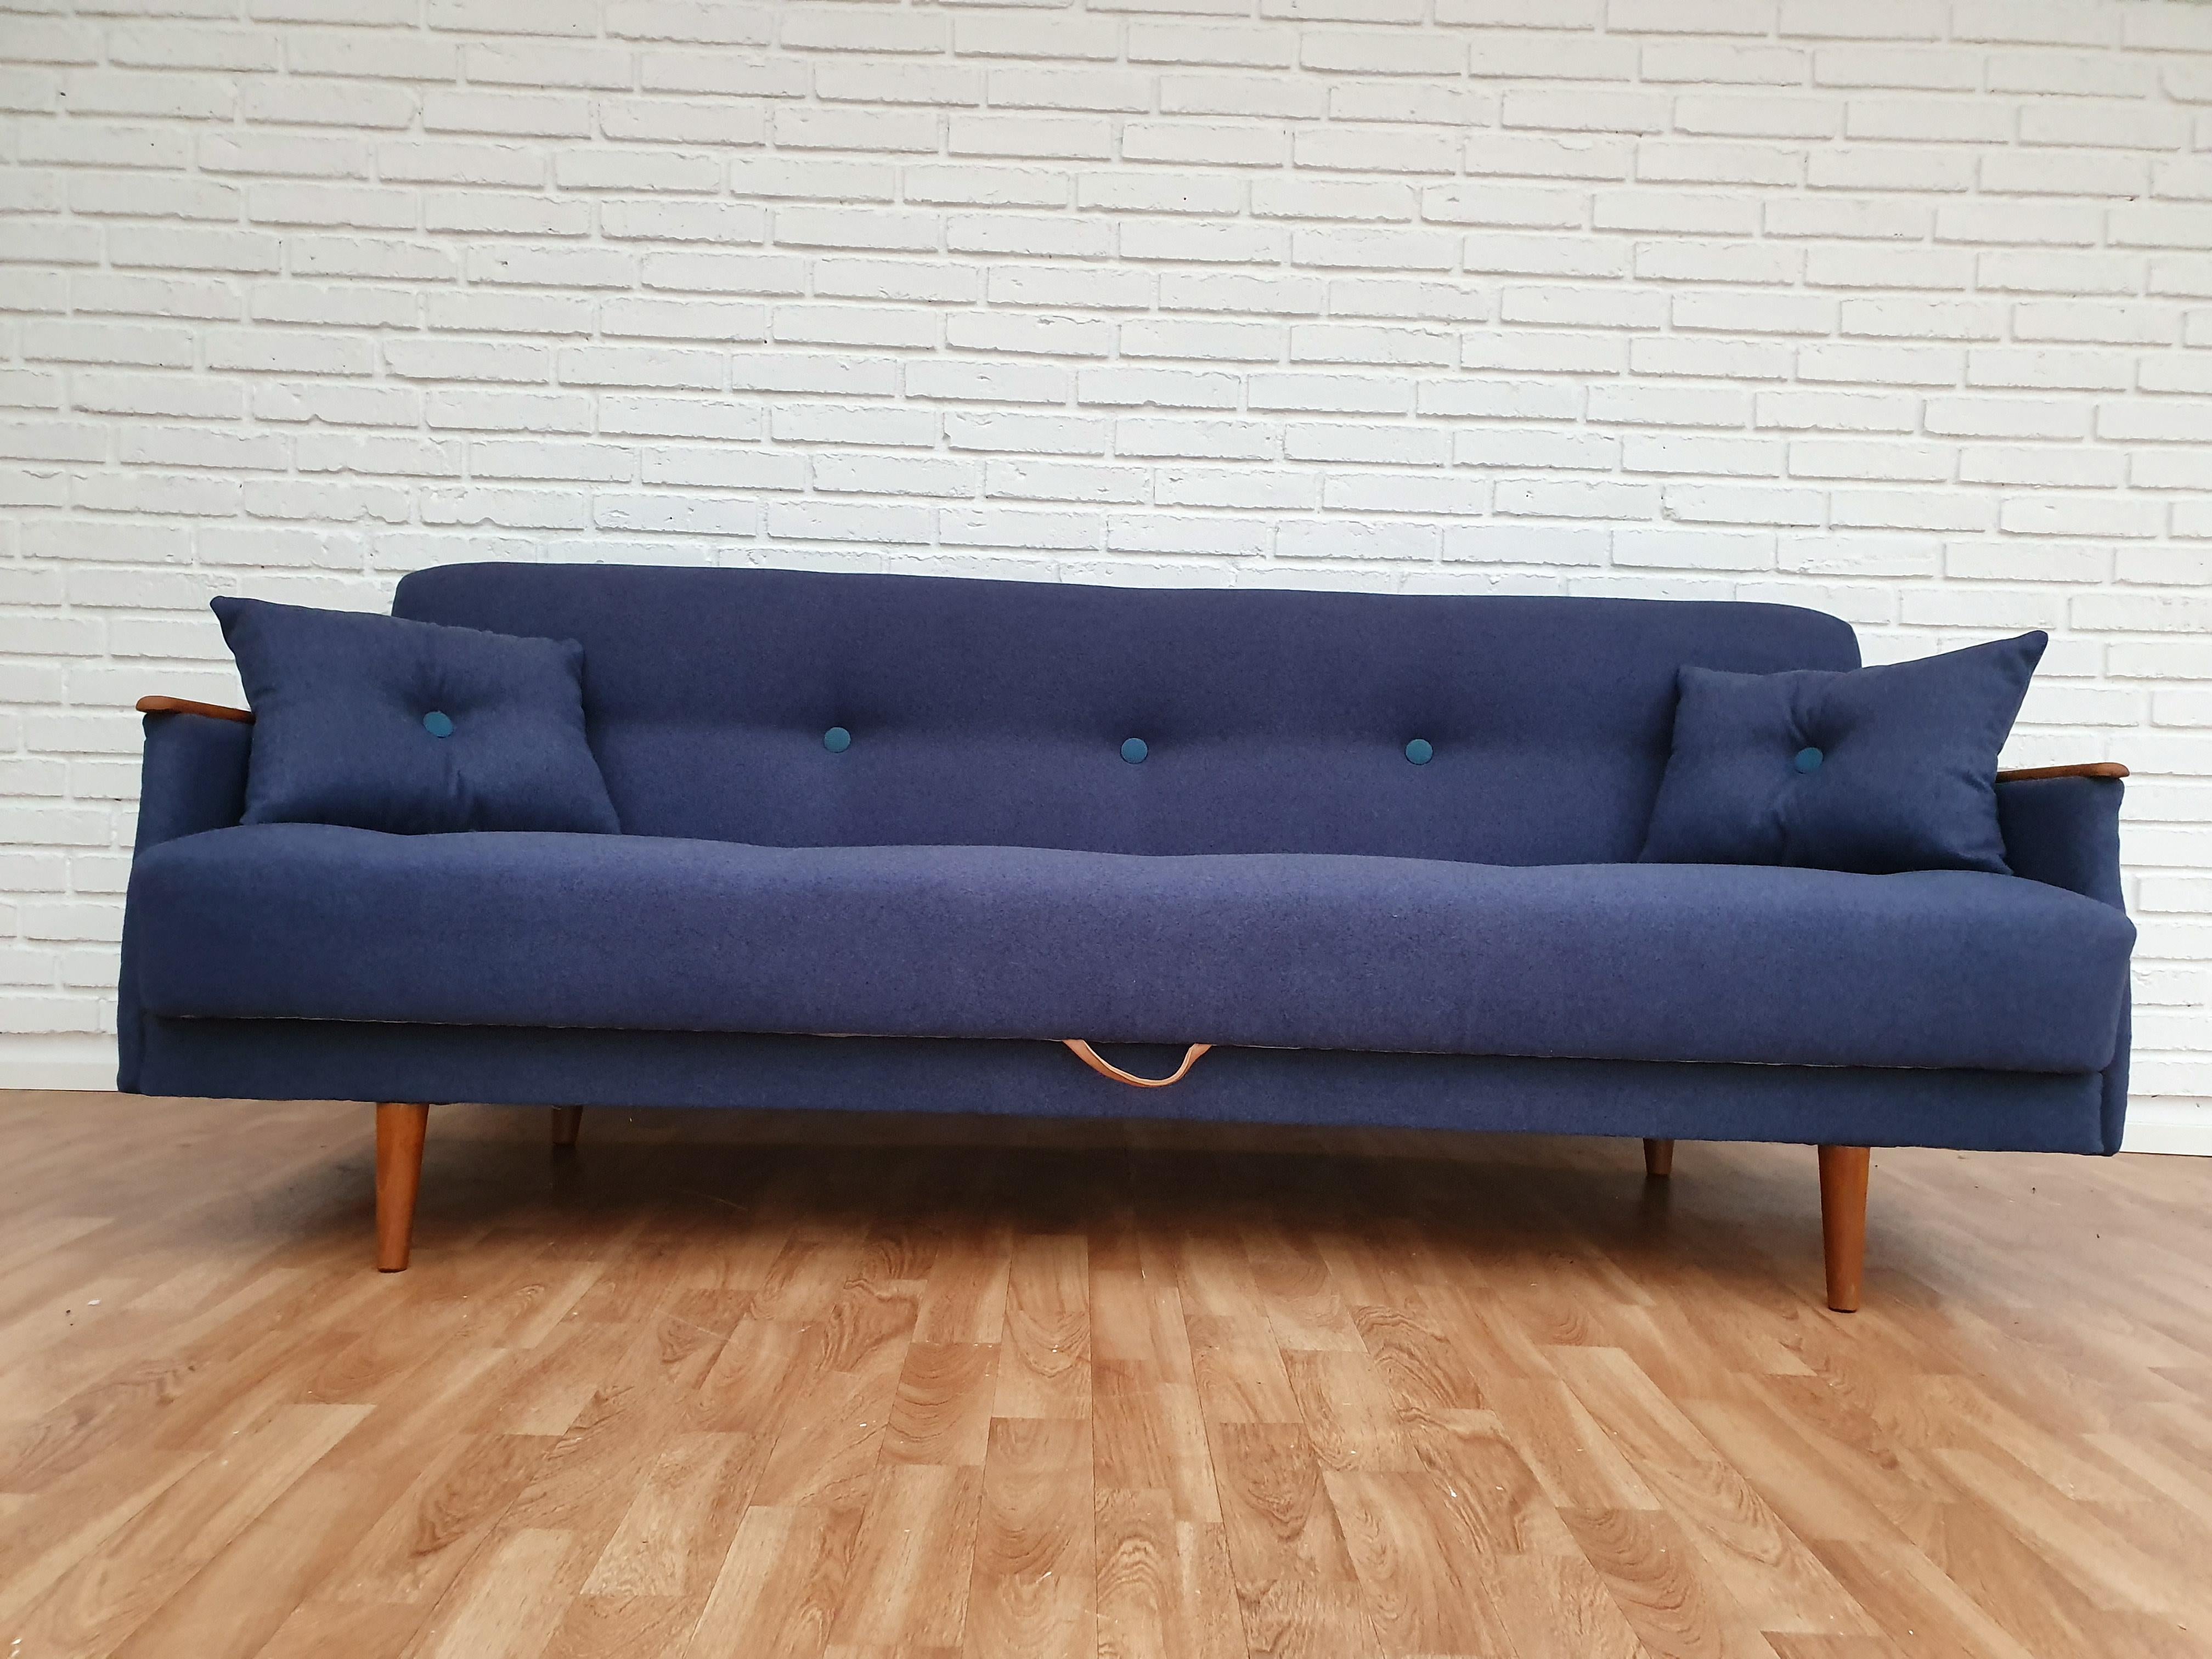 Danish Designed, 3 Persons Sofa Bed, 1960s, Completely Restored im Angebot 5